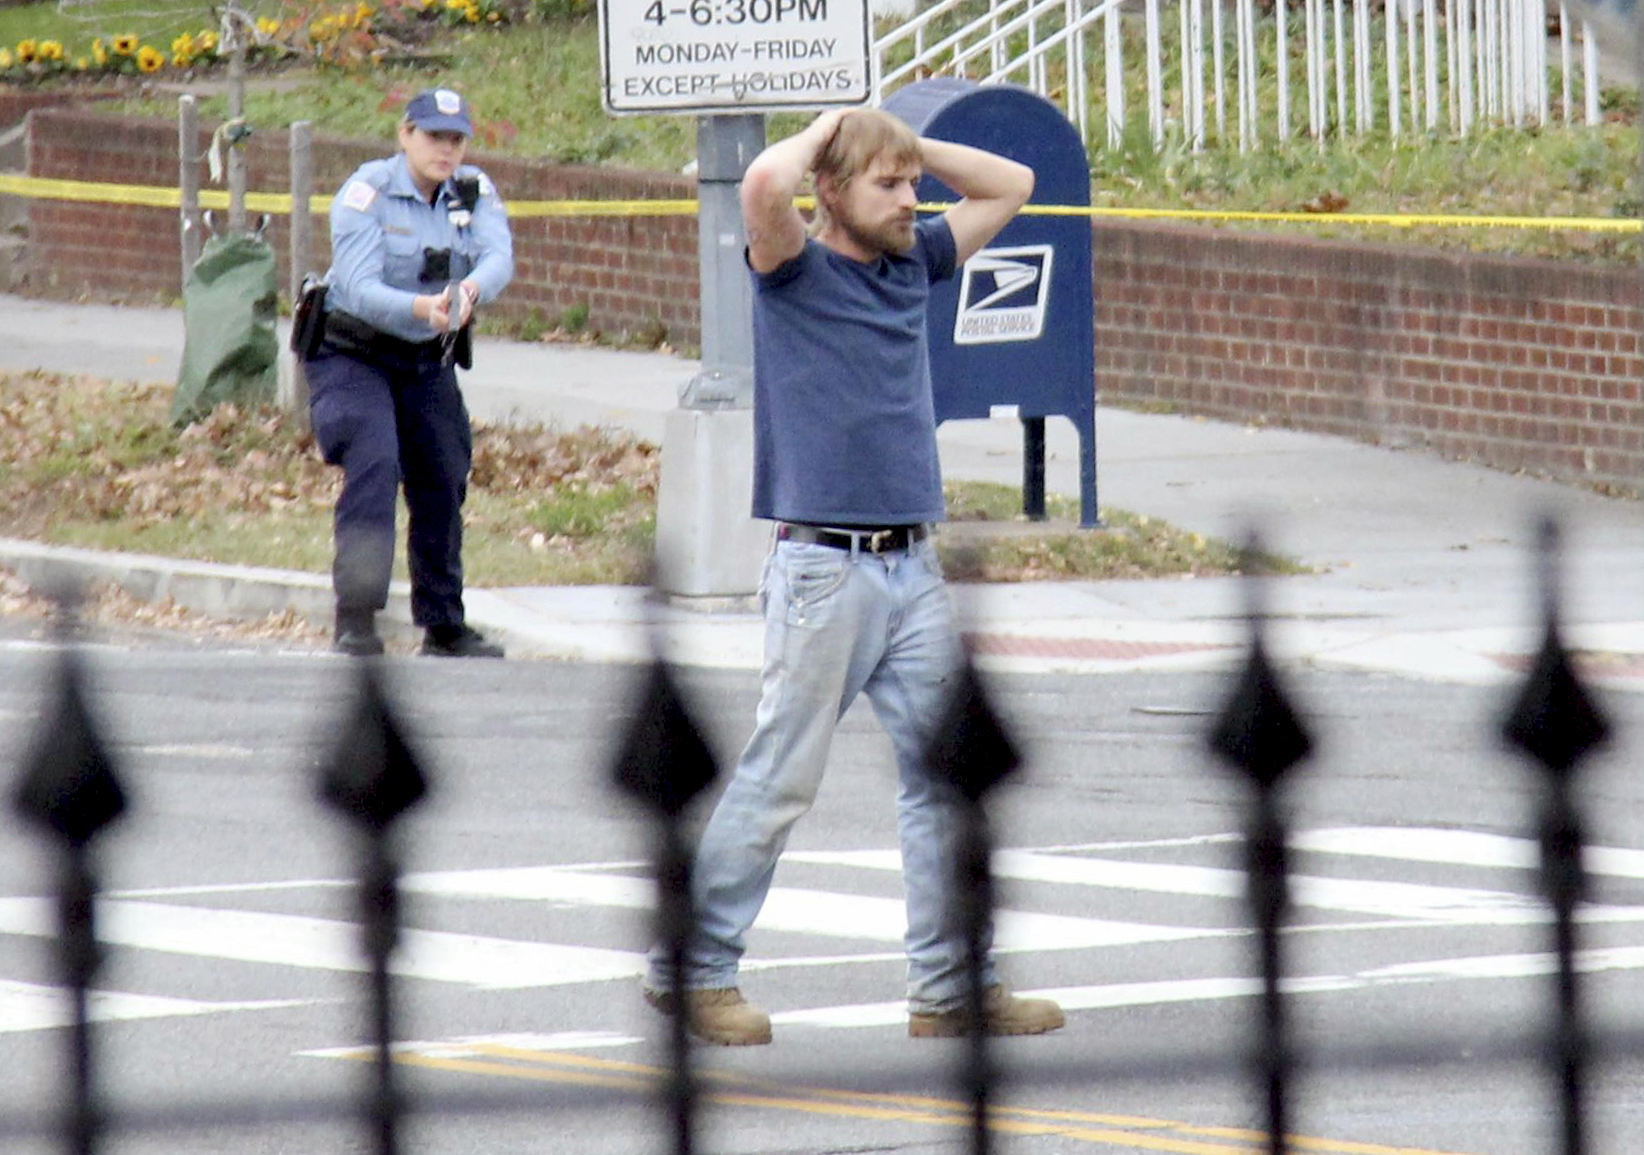 Edgar Maddison Welch, 28 of Salisbury, N.C., surrenders to police Sunday, Dec. 4, 2016, in Washington after firing a gun while investigating a conspiracy theory about Hillary Clinton running a child sex ring out of a pizza place. (Sathi Soma—AP)